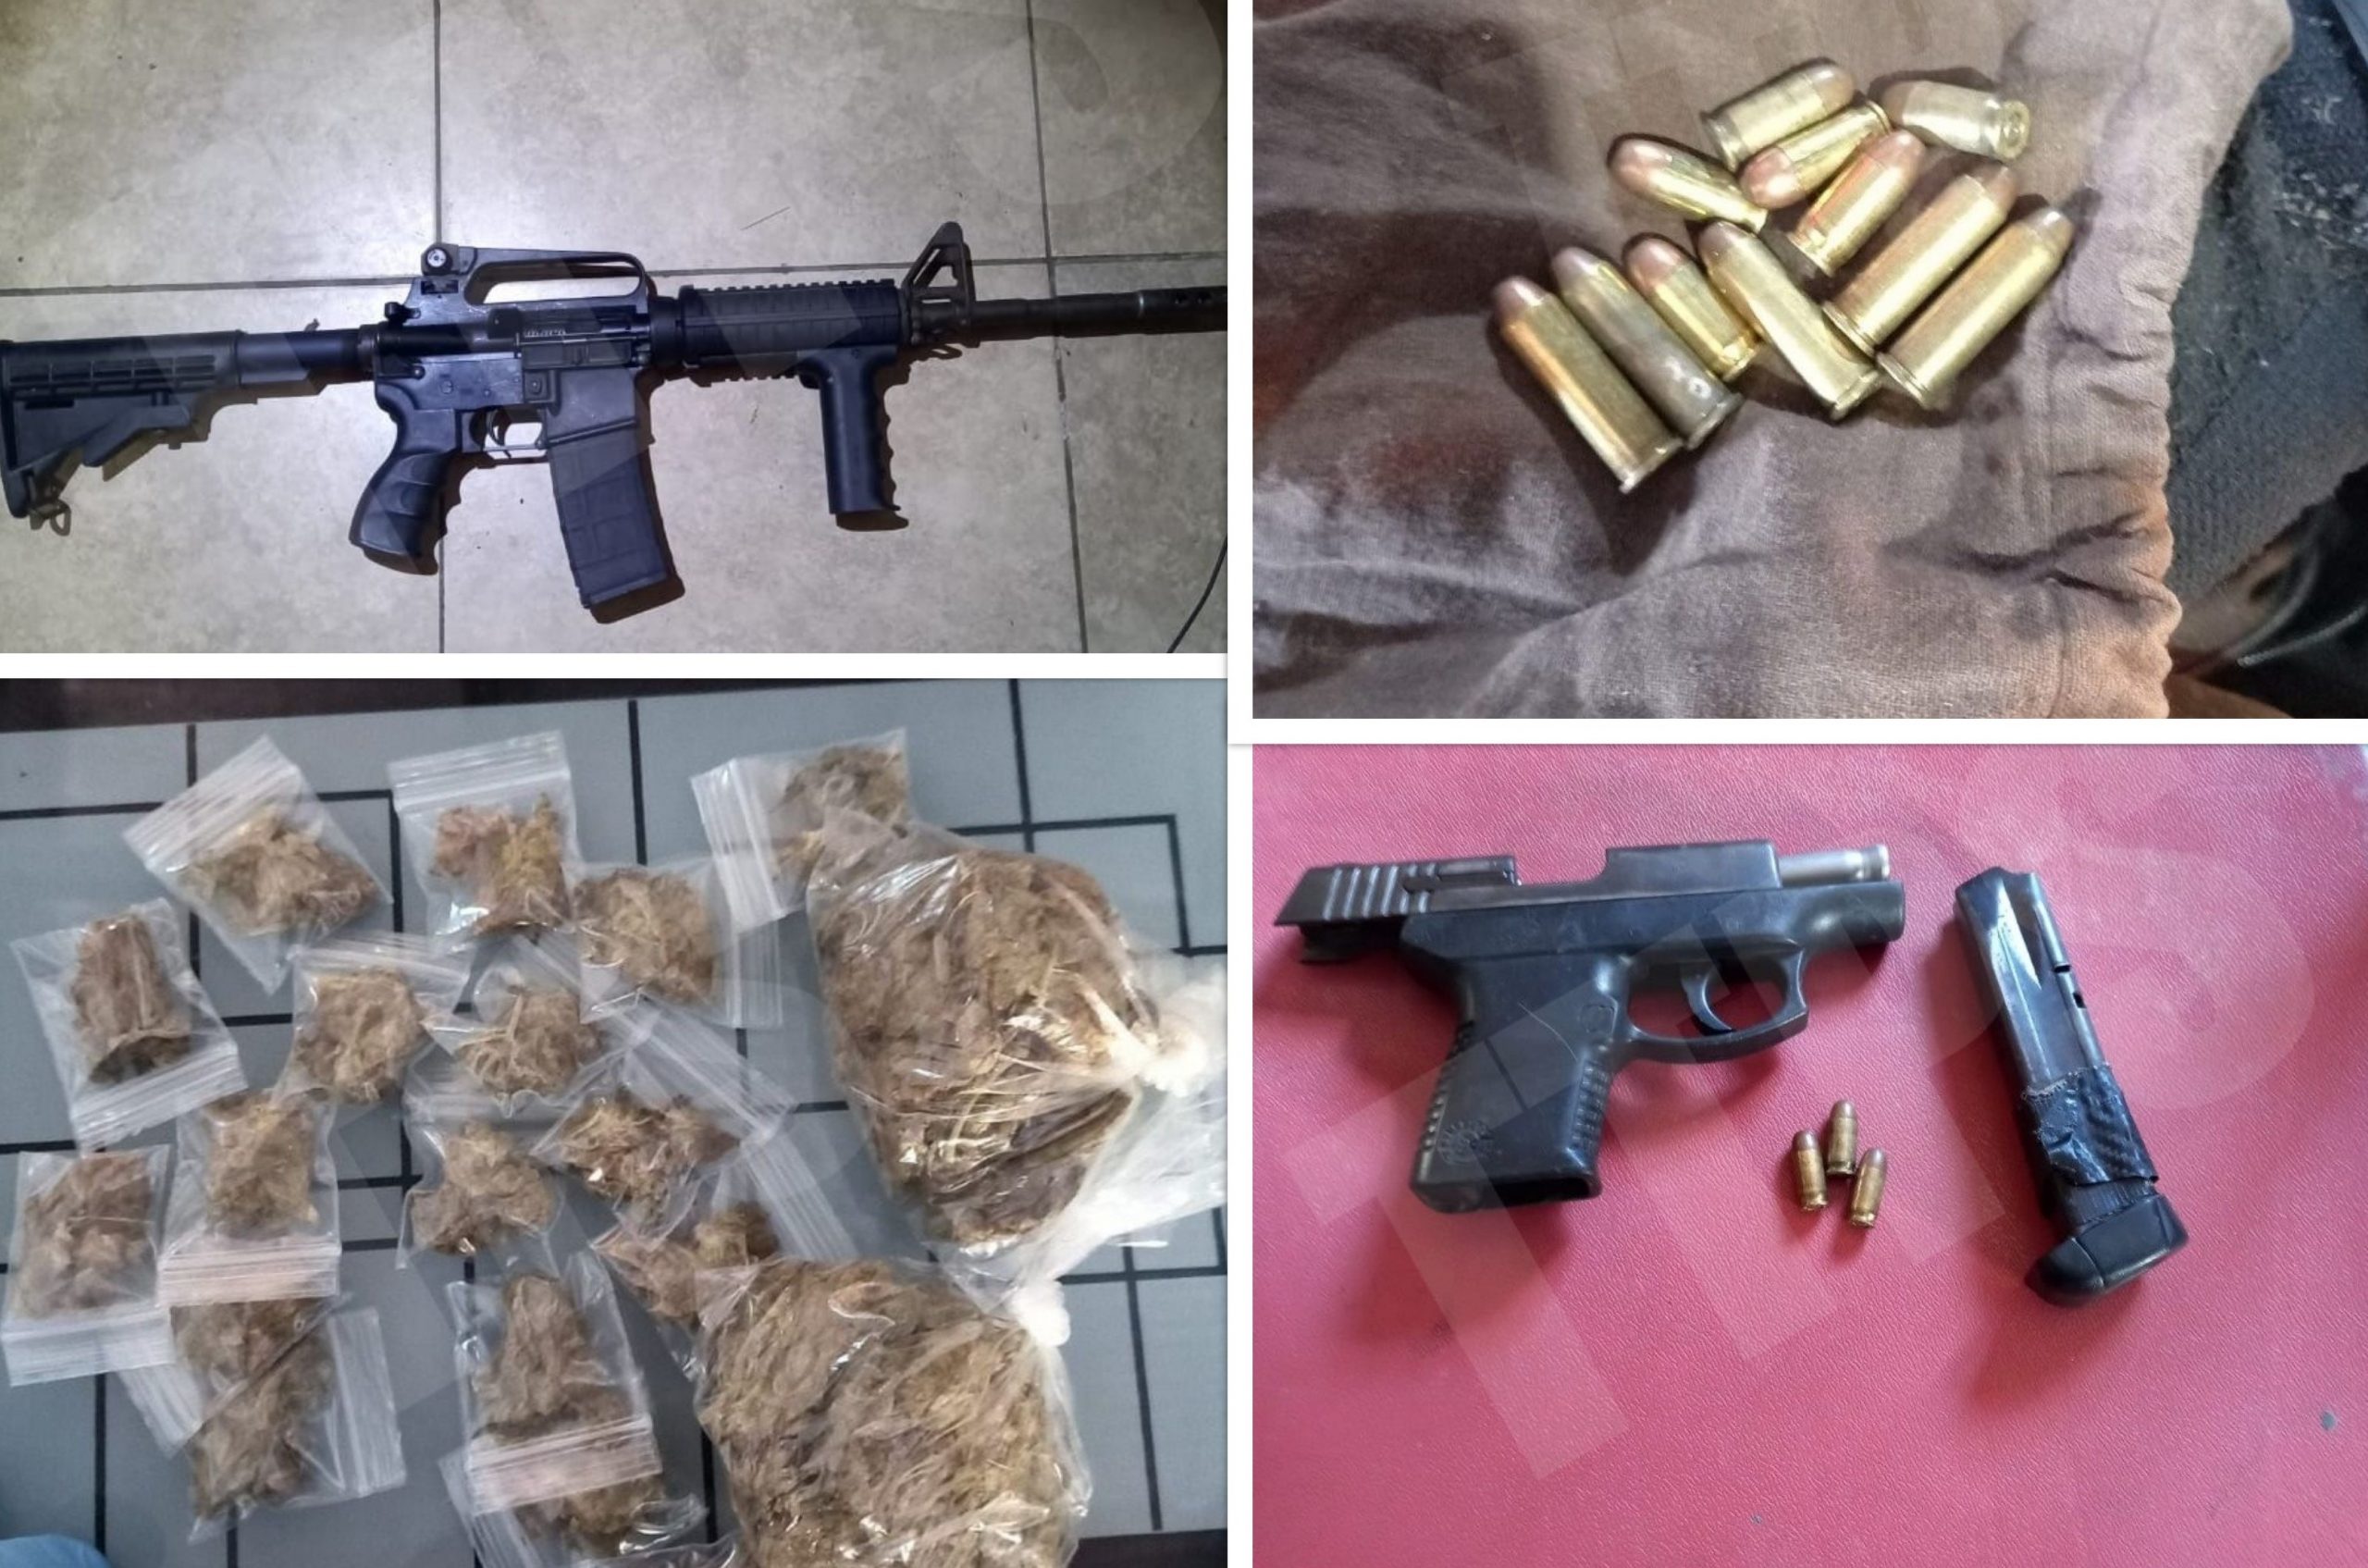 14-year-old girl arrested with 5 others for guns, ammo and drugs